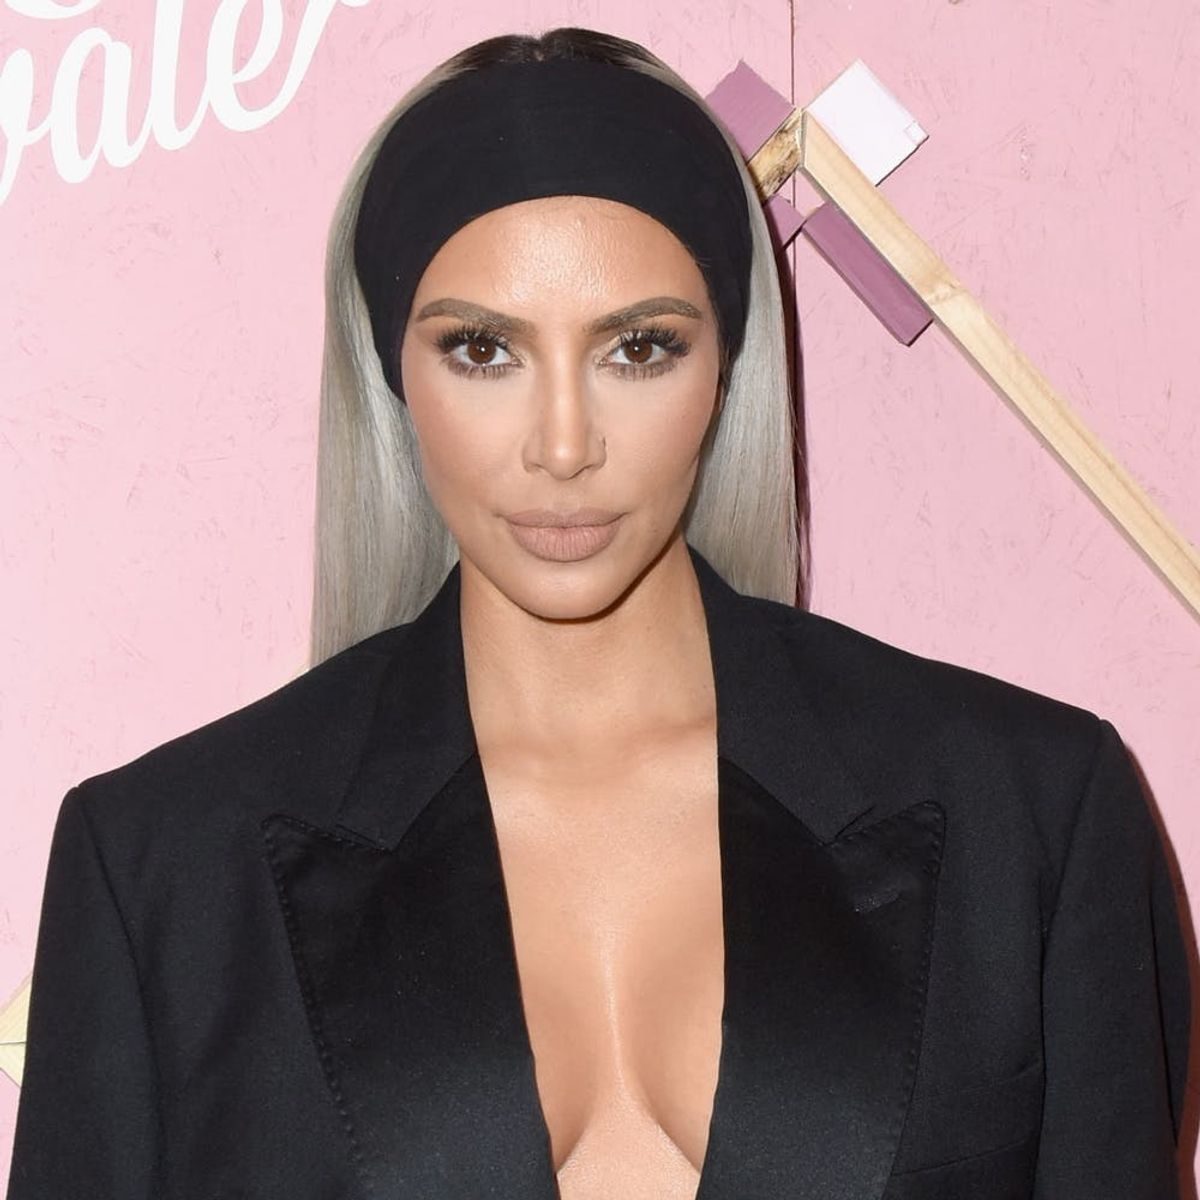 Kim Kardashian West Shares a Sweet Close-Up Photo of Baby Chicago